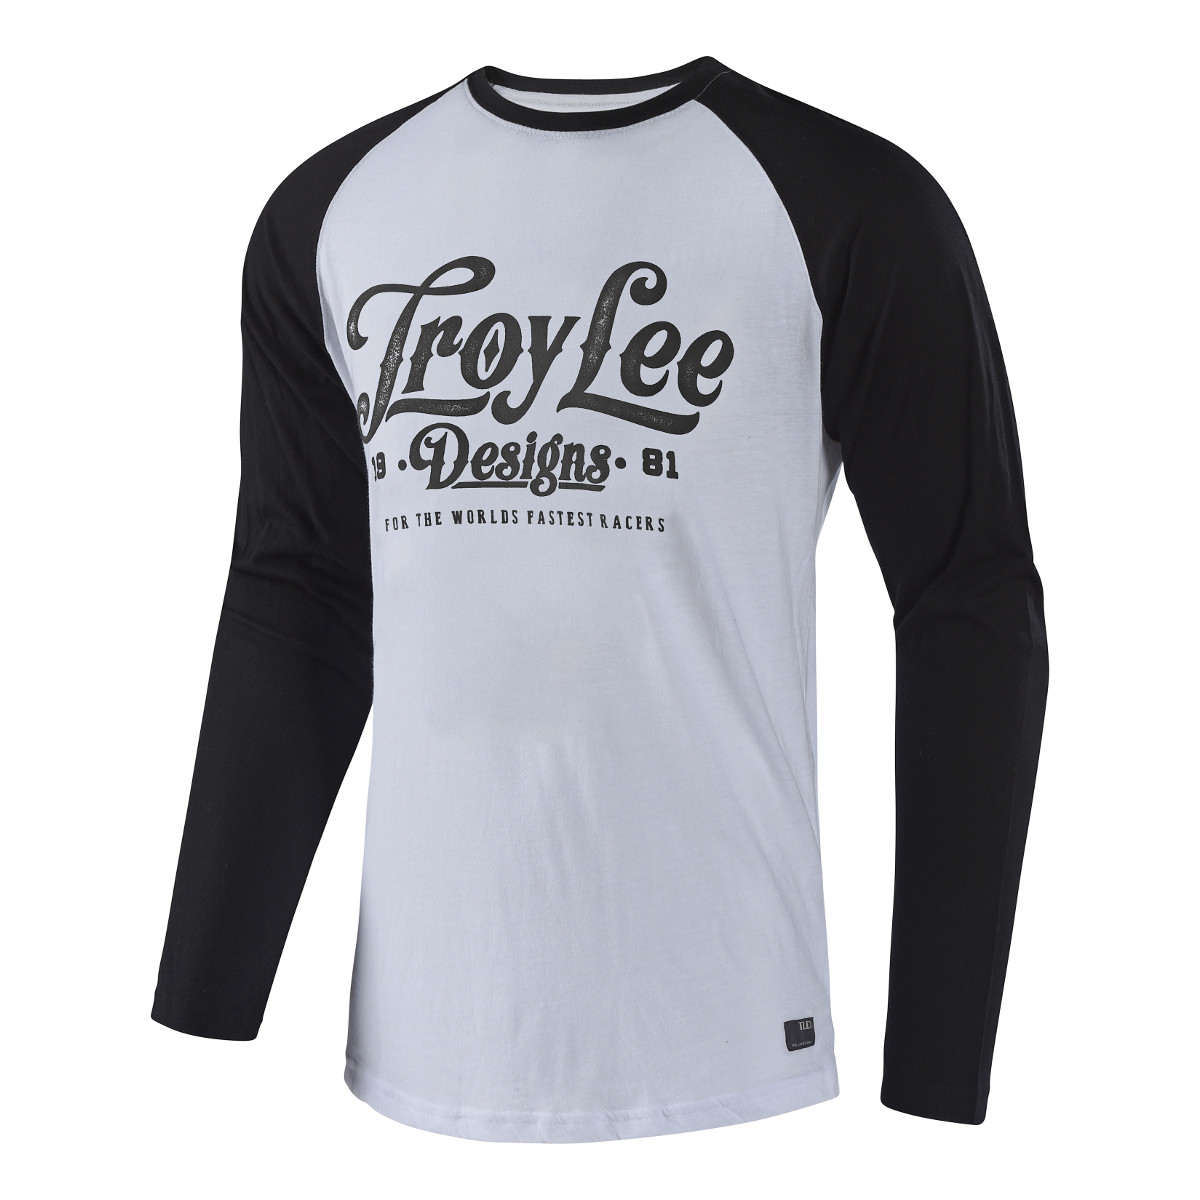 Troy Lee Designs T-Shirt Manica Lunga Spiked White/Black